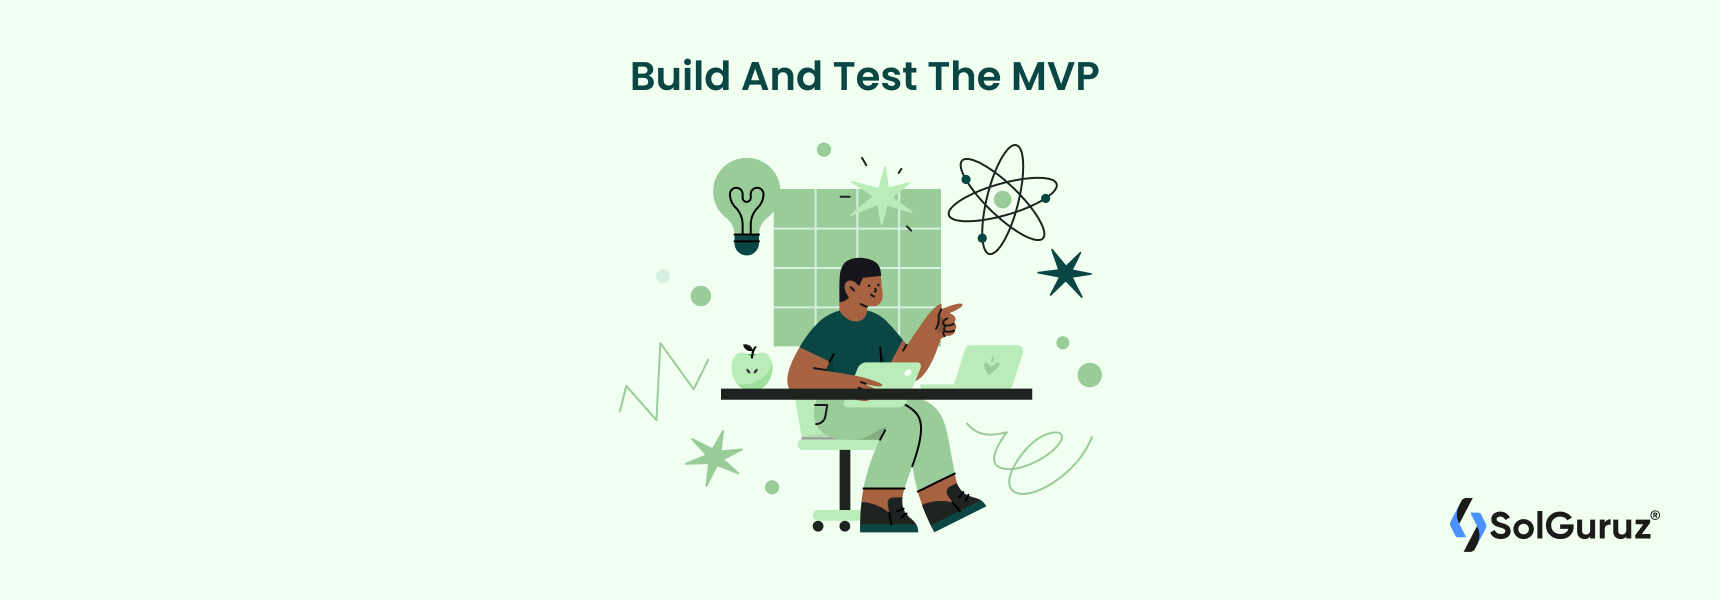 Build And Test The MVP Version